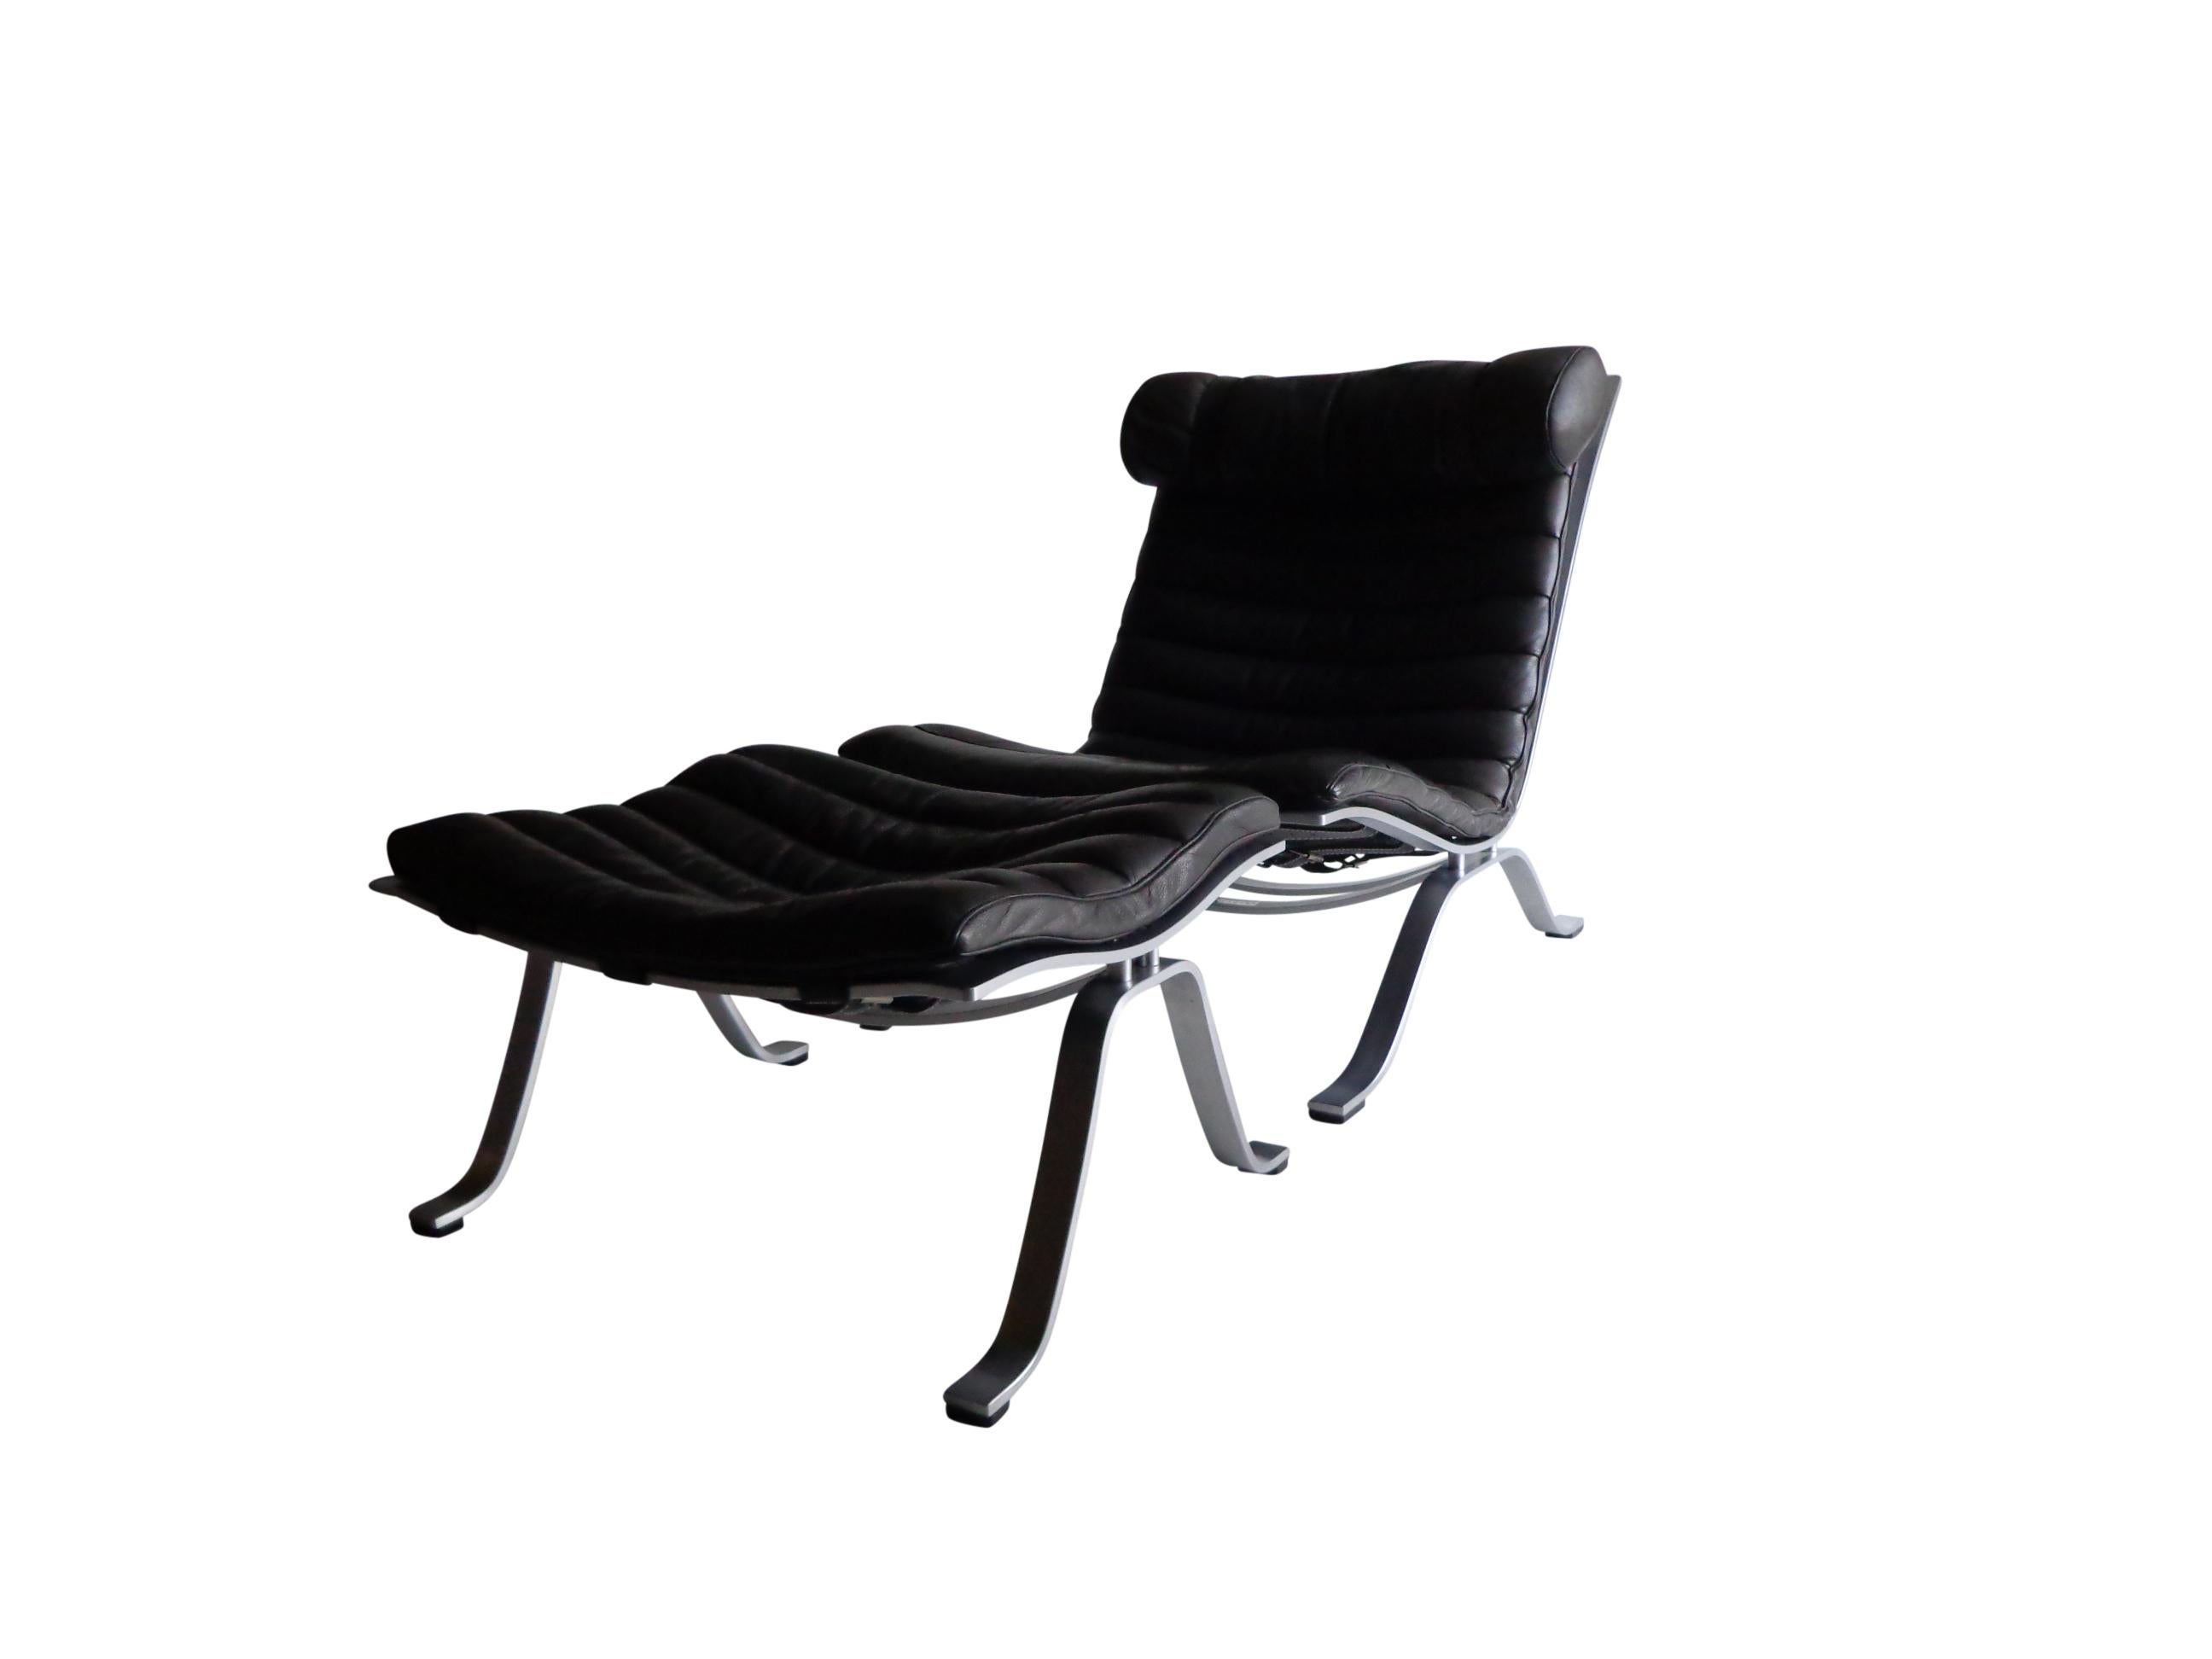 Comfortable lounge chair and ottoman designed by Arne Norell. This award winning lounge chair is made of high quality matt polished steel and original black leather. The set is in nice vintage condition with fantastic patina from age and